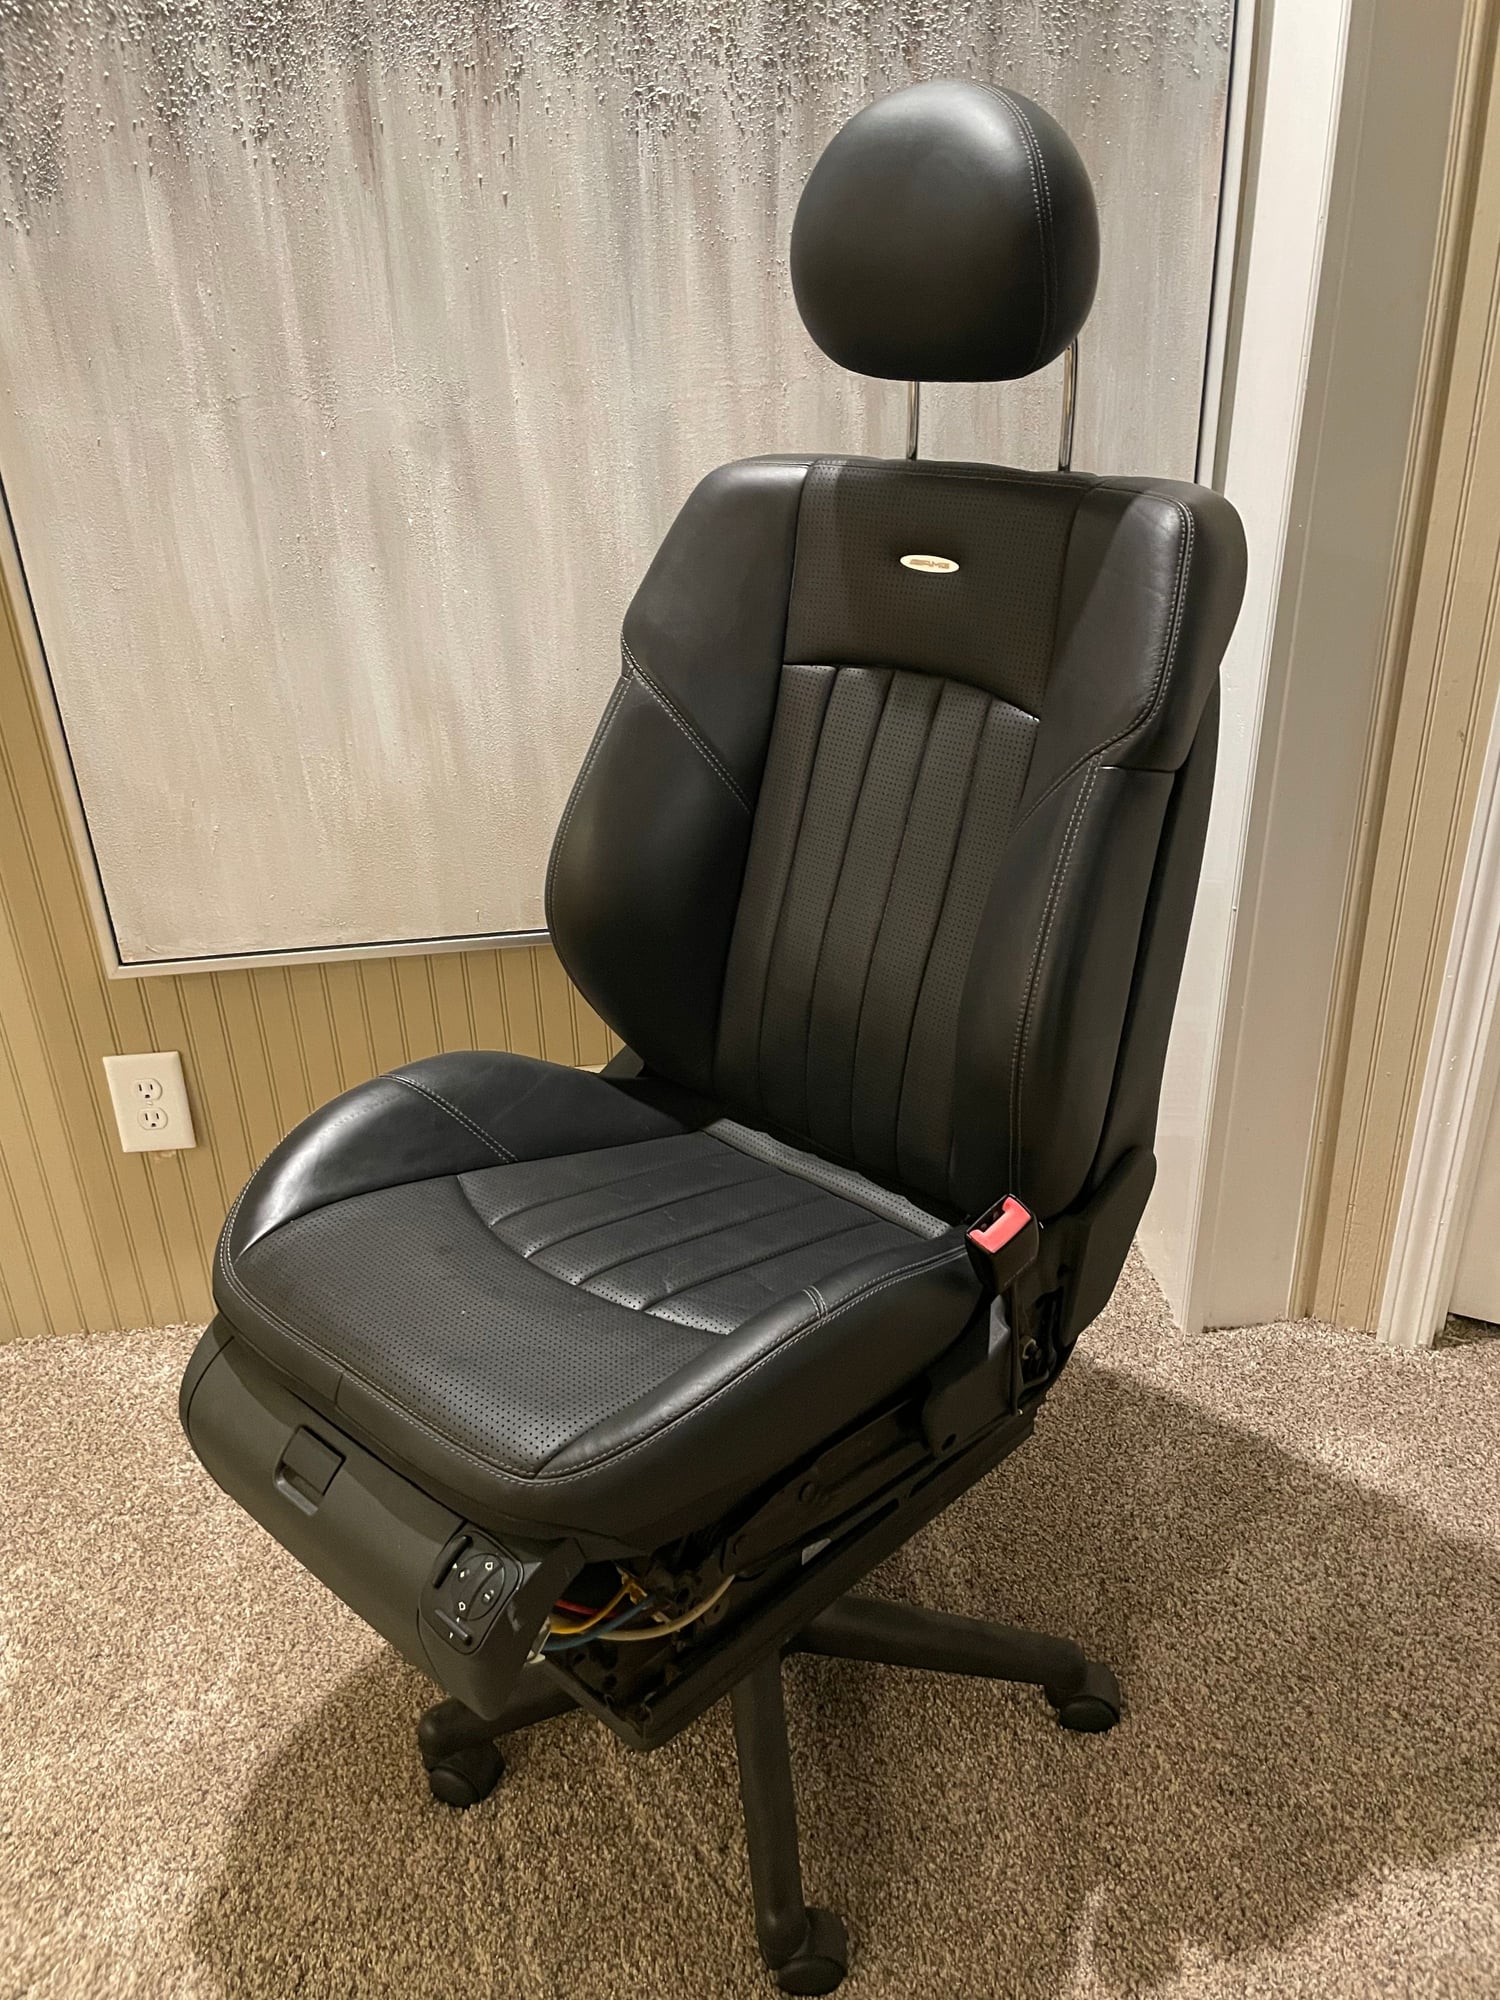 Interior/Upholstery - W211 E55 Office Chair - Used - 2006 to 2011 Mercedes-Benz E55 AMG - Marietta, GA 30068, United States